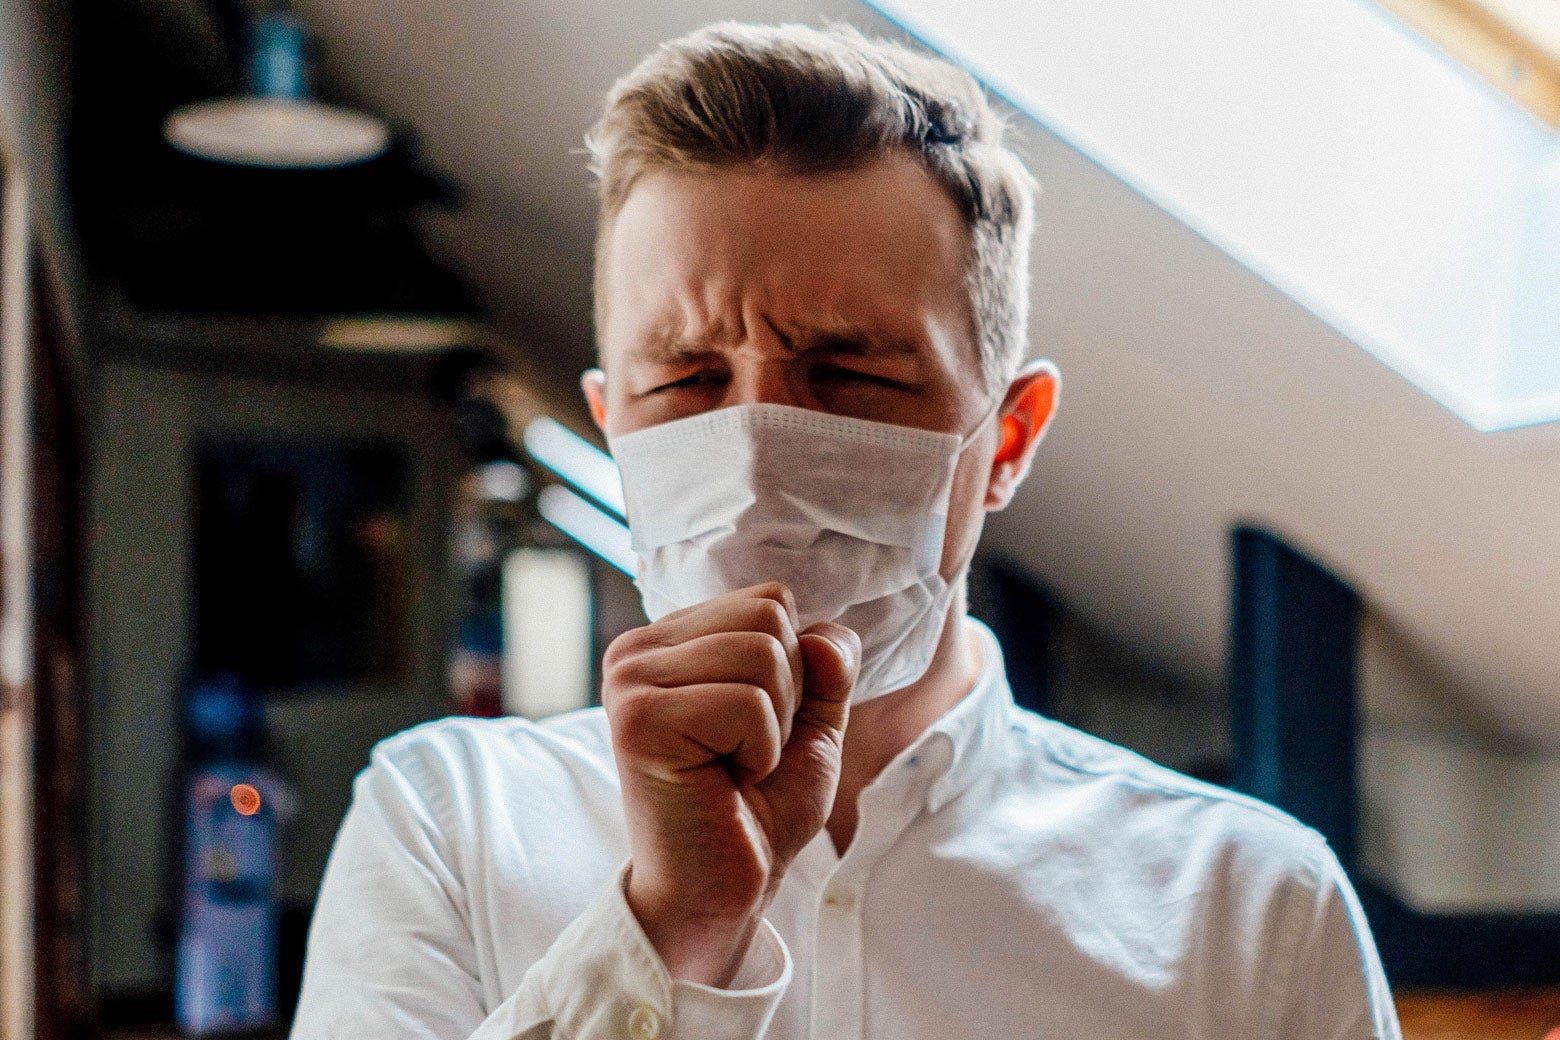 Stock image of a man wearing a medical mask and coughing.